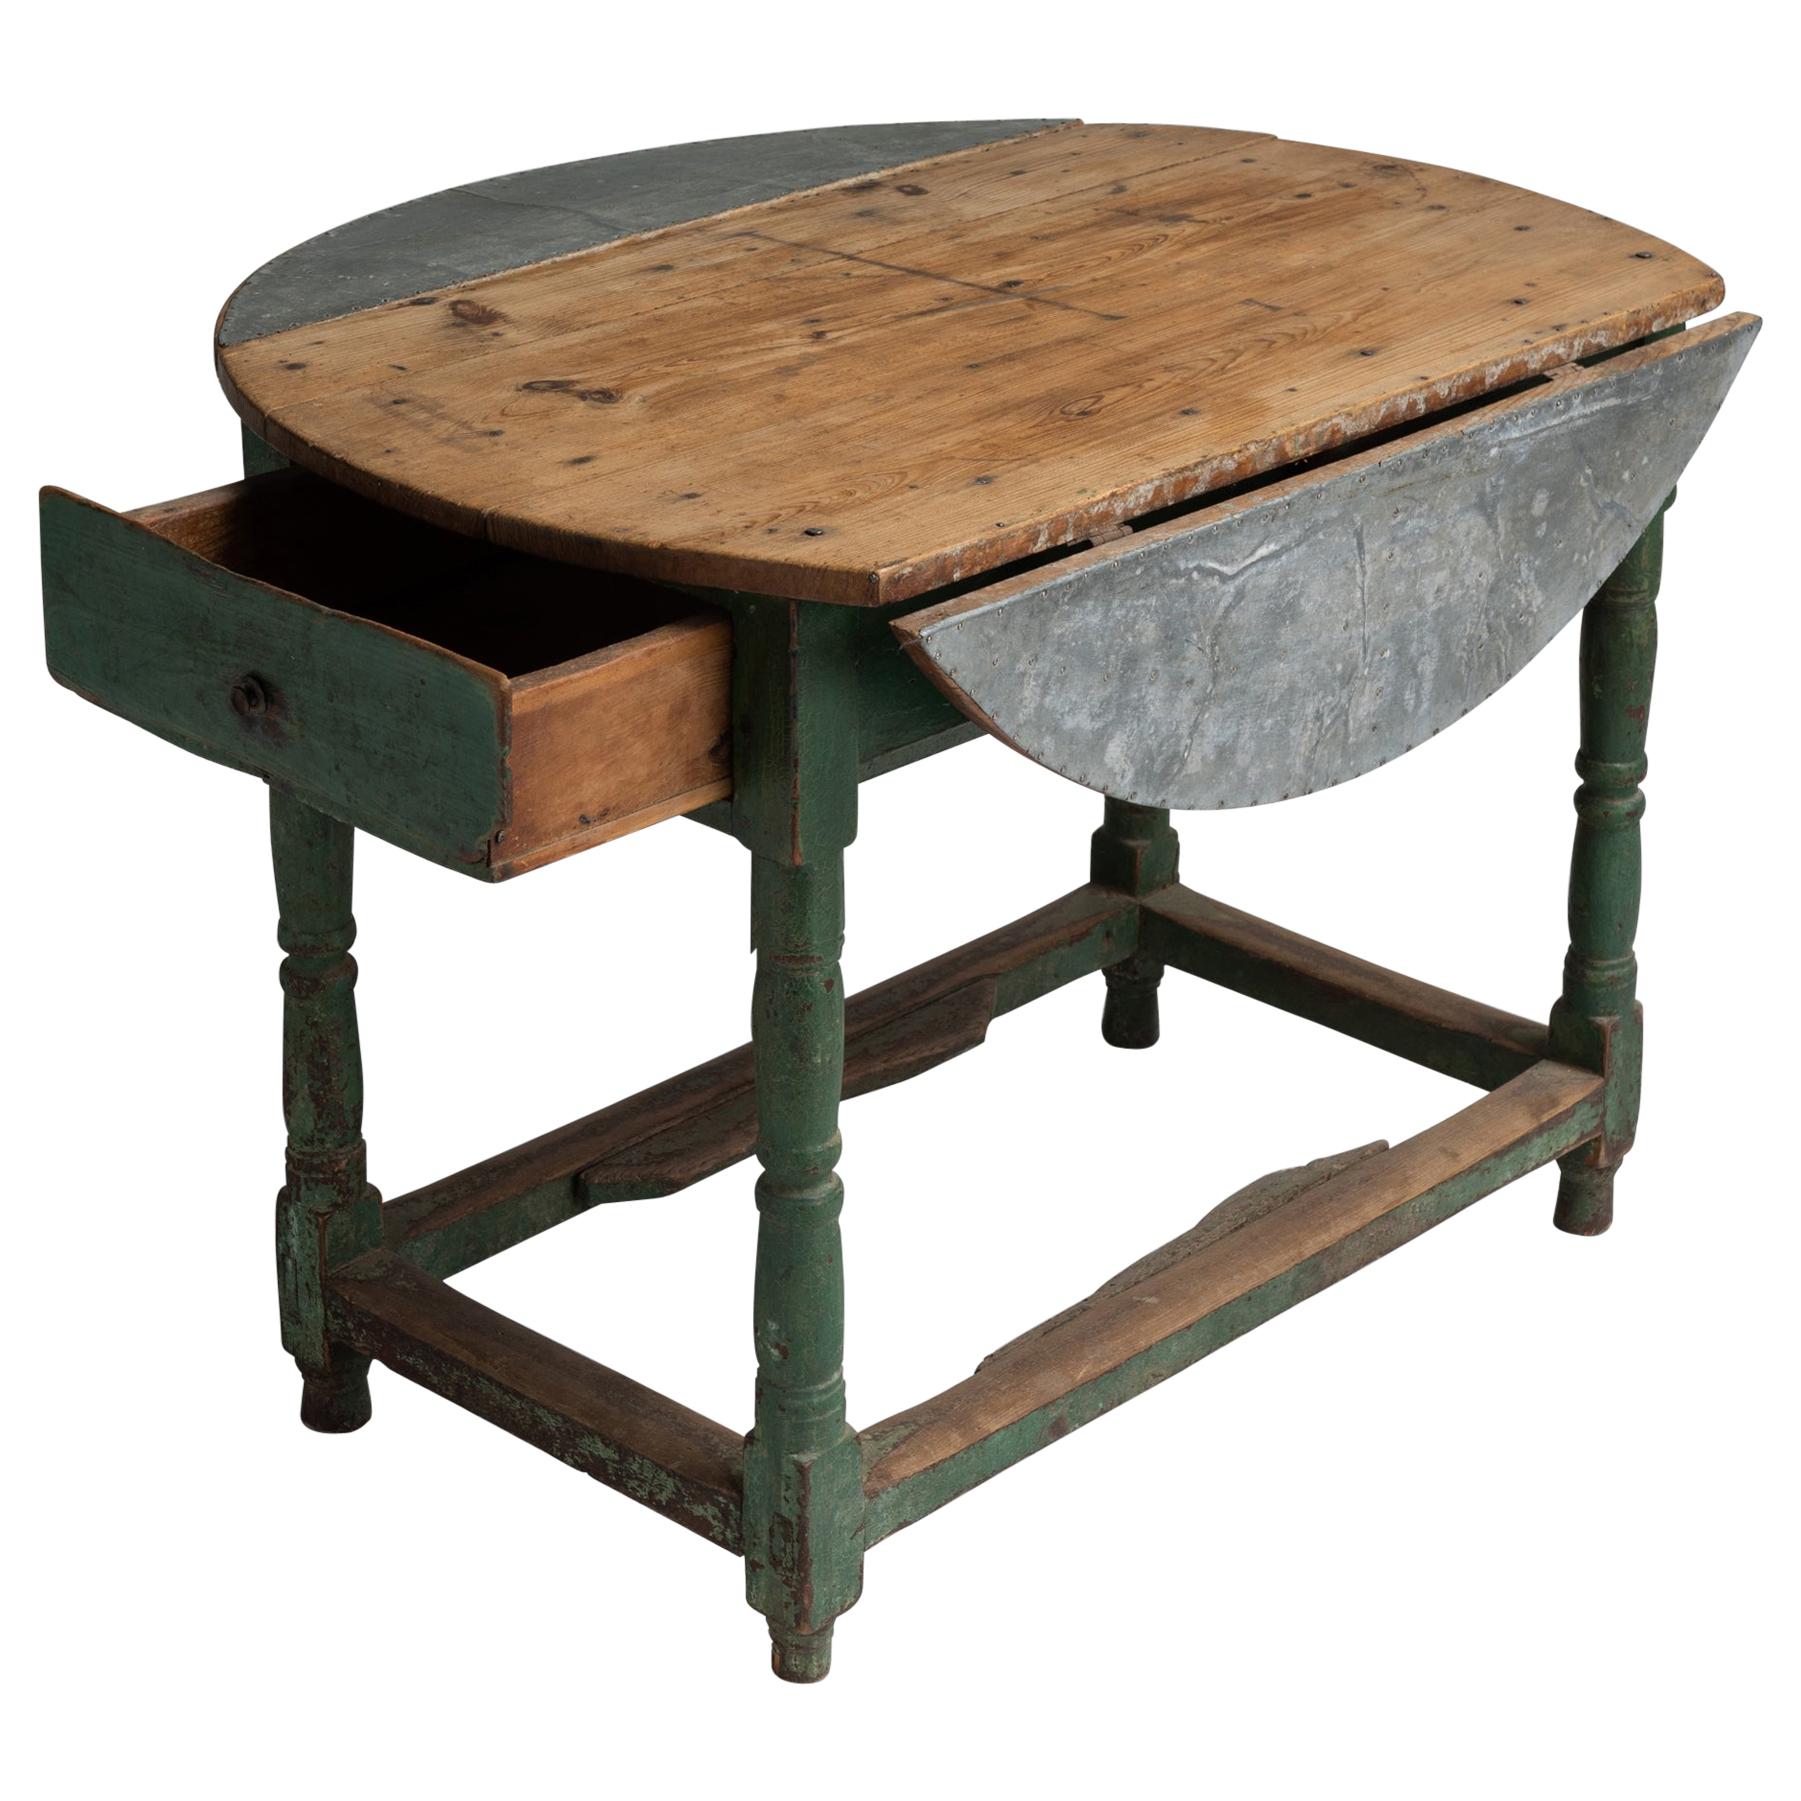 Zinc and Pine Table